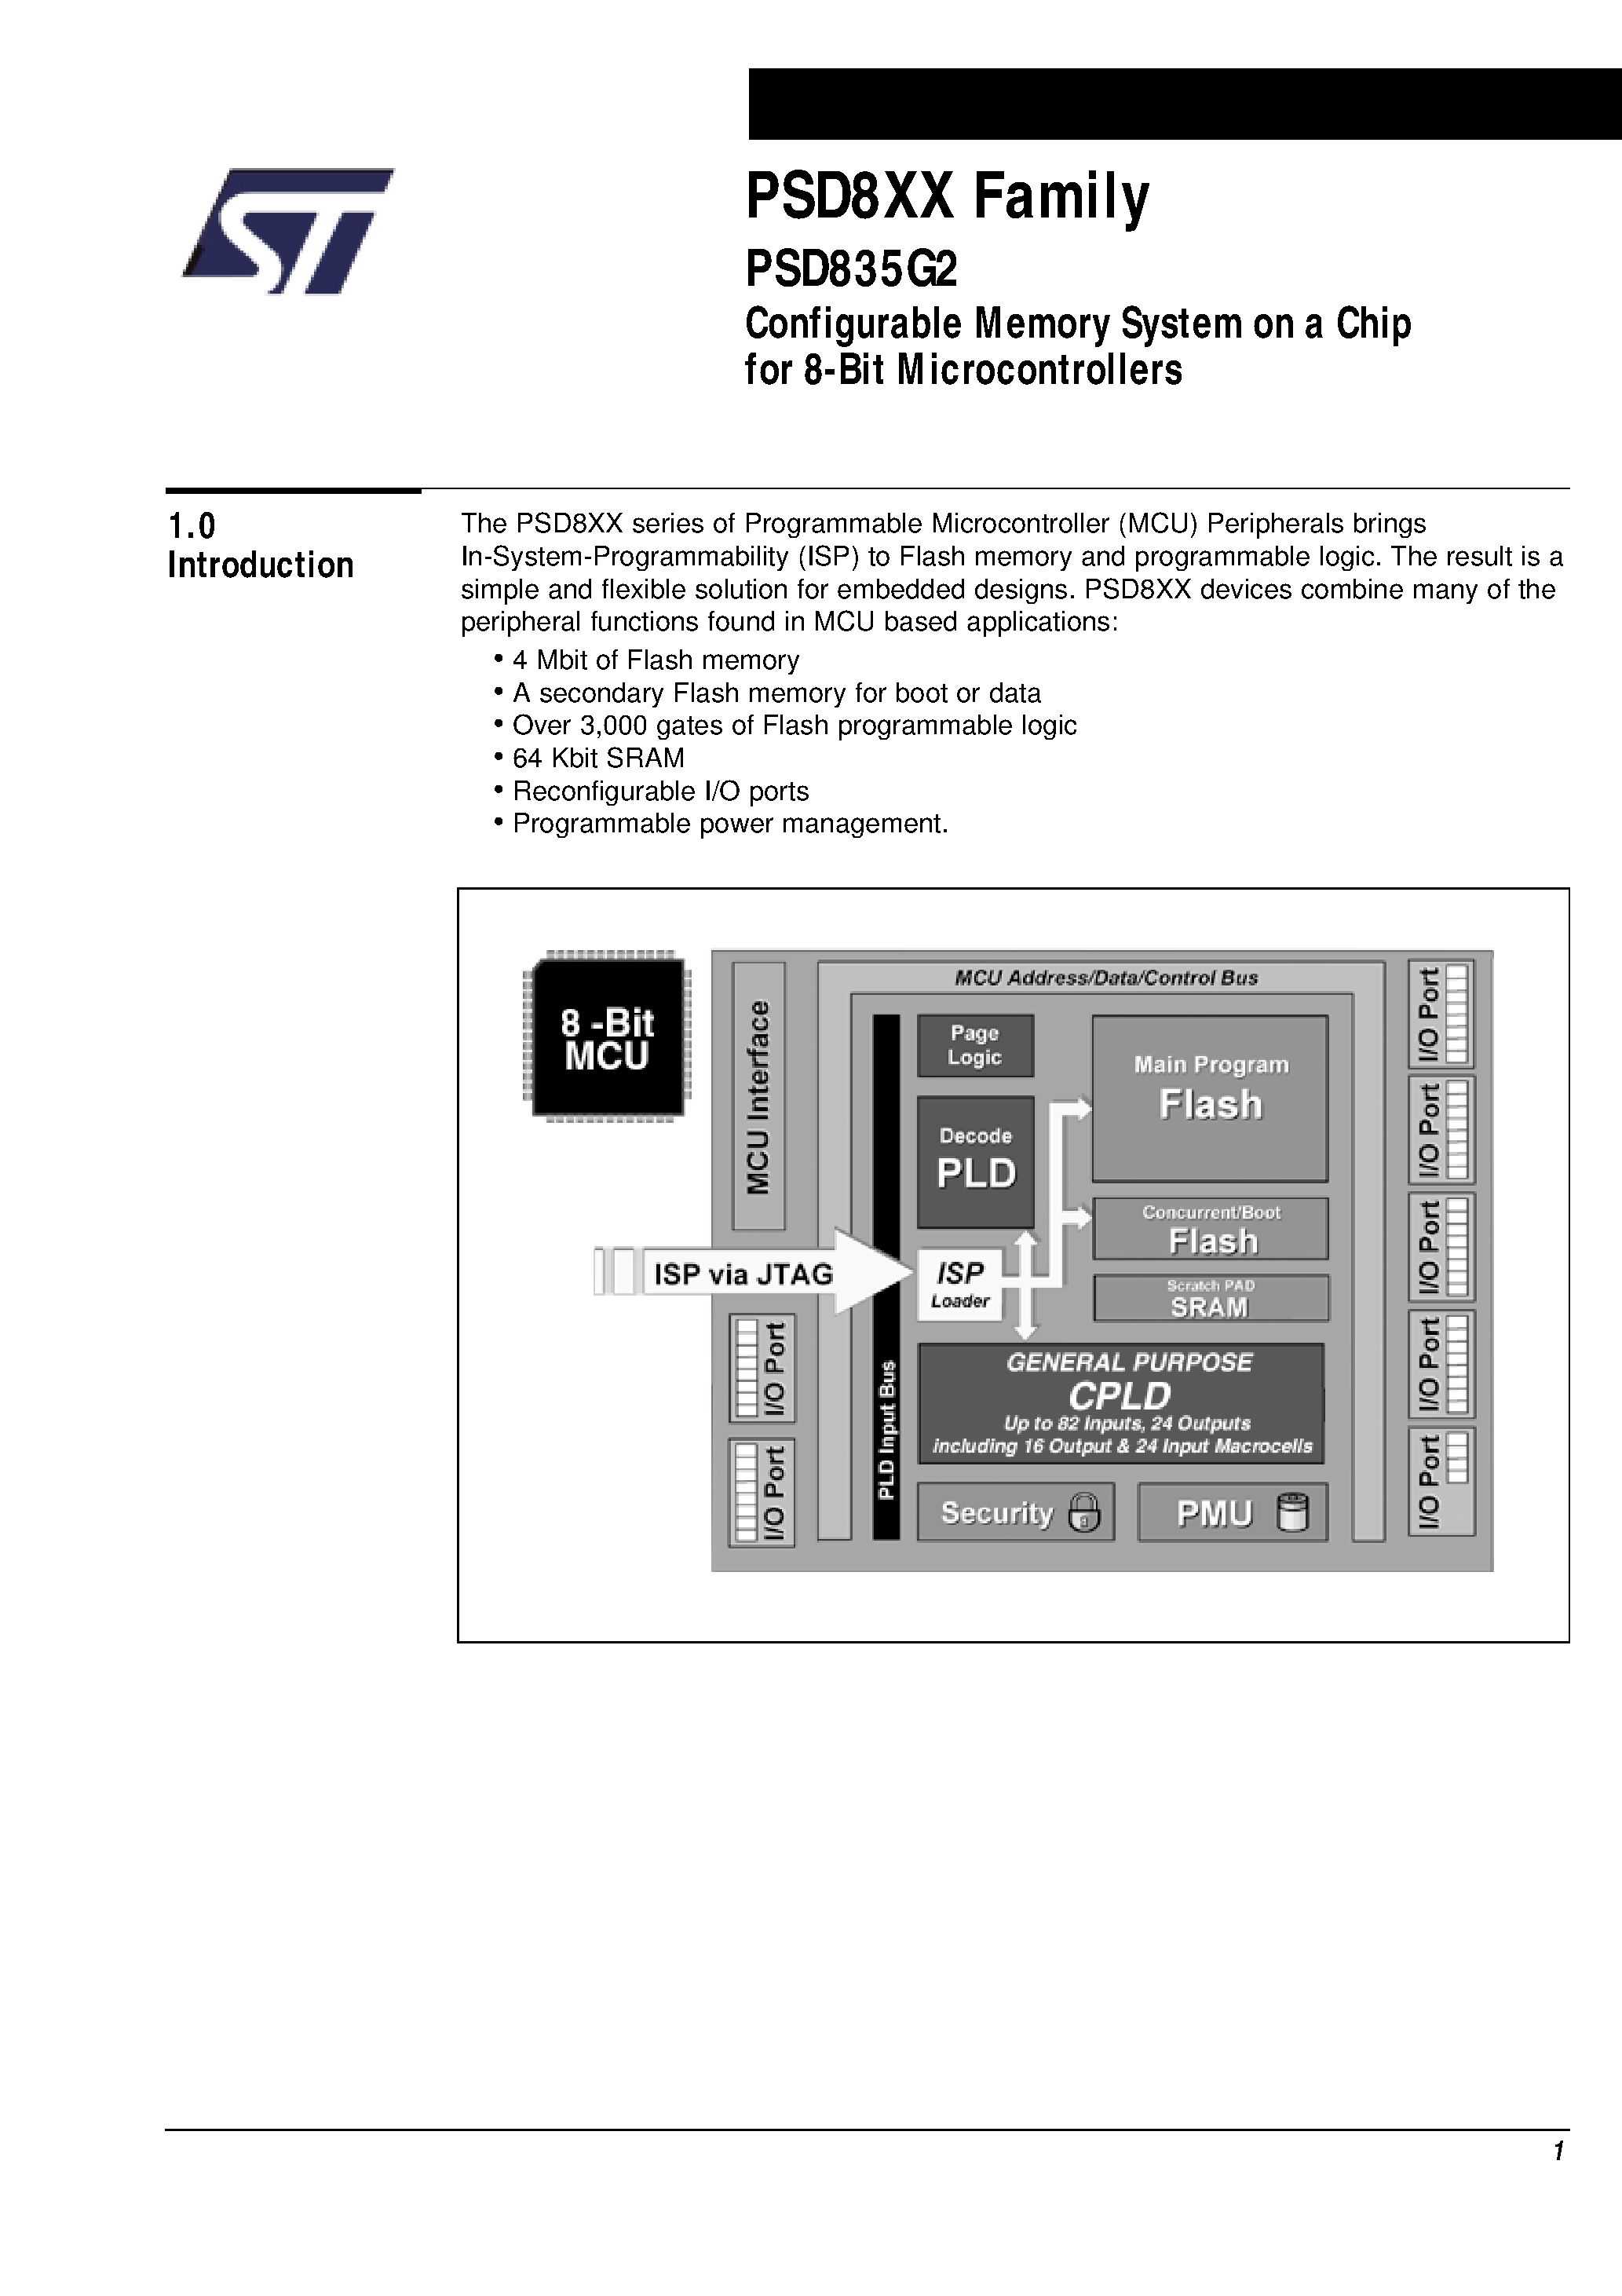 Datasheet PSD835F2V-A-15J - Configurable Memory System on a Chip for 8-Bit Microcontrollers page 2